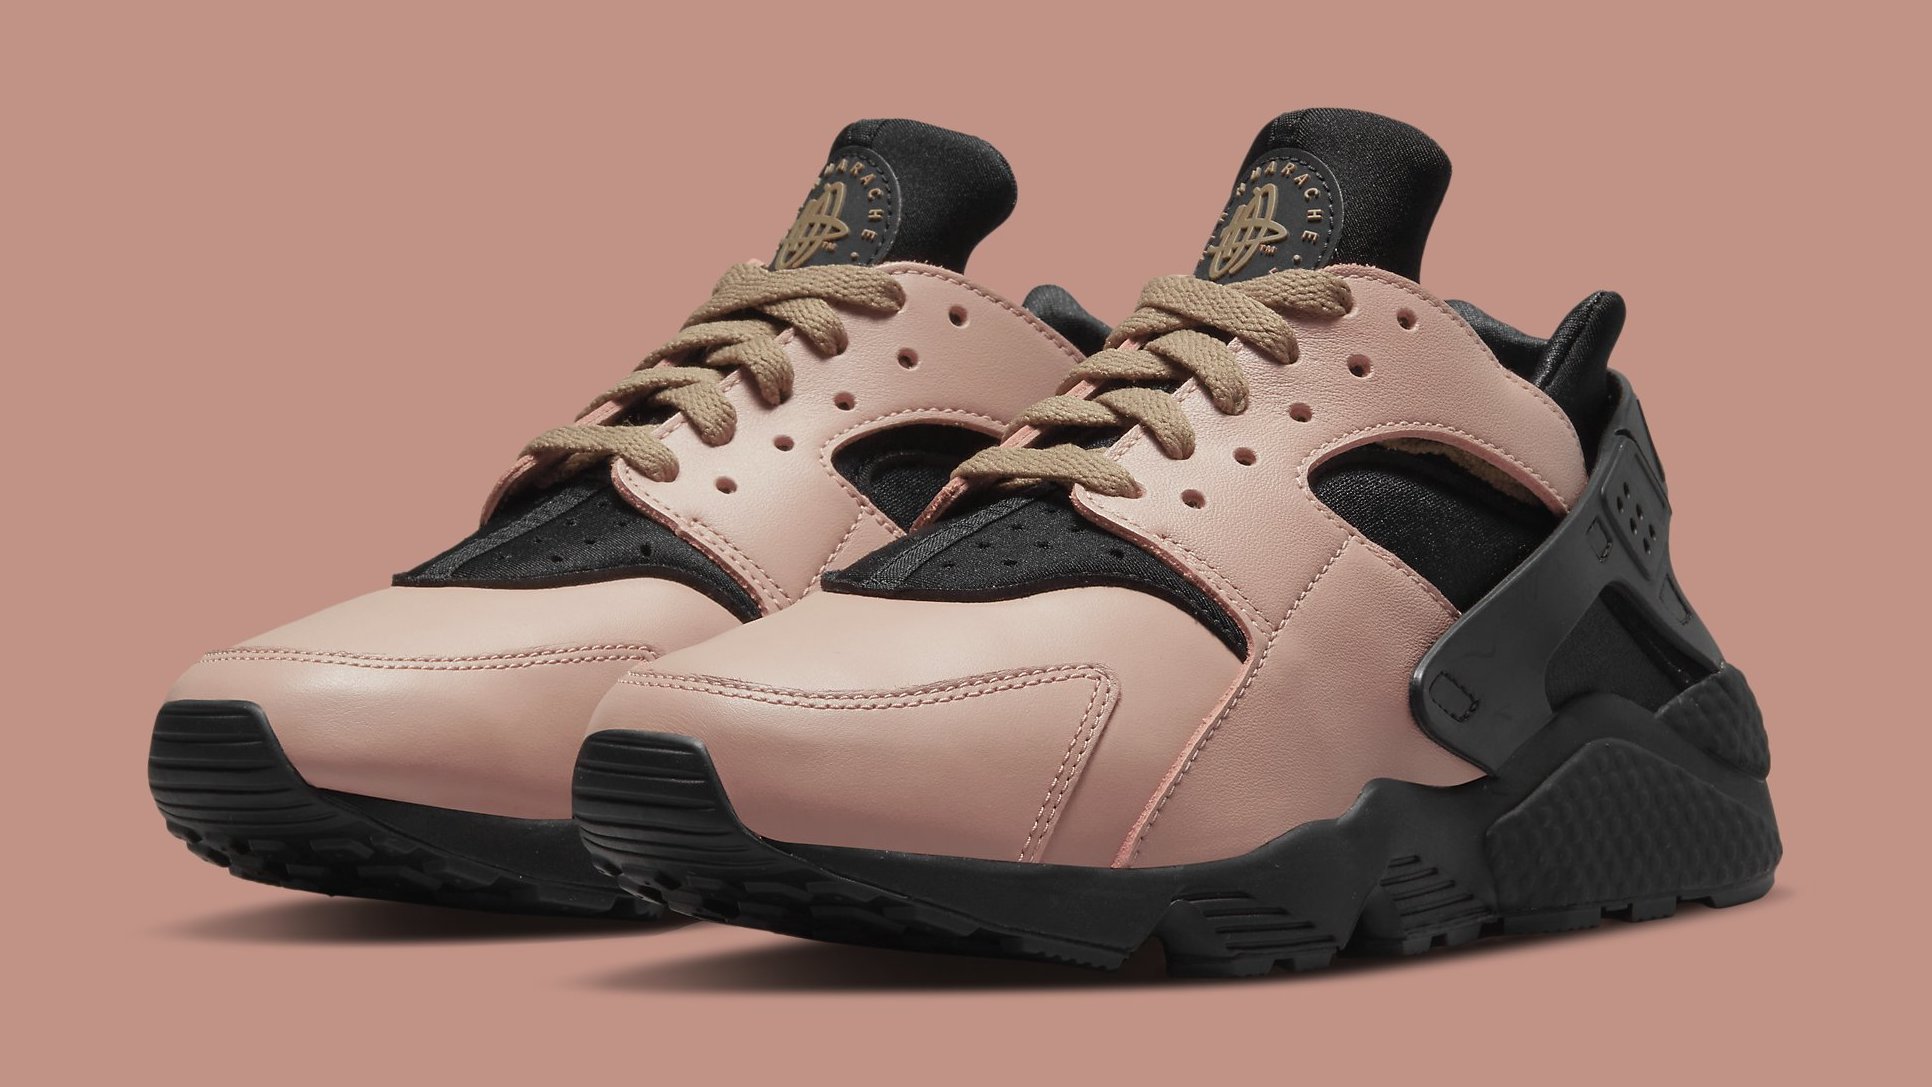 Verlichting constant plafond Nike Air Huarache 'Toadstool' 2021 Release Date DH8143-200​​​​​​​ | Sole  Collector